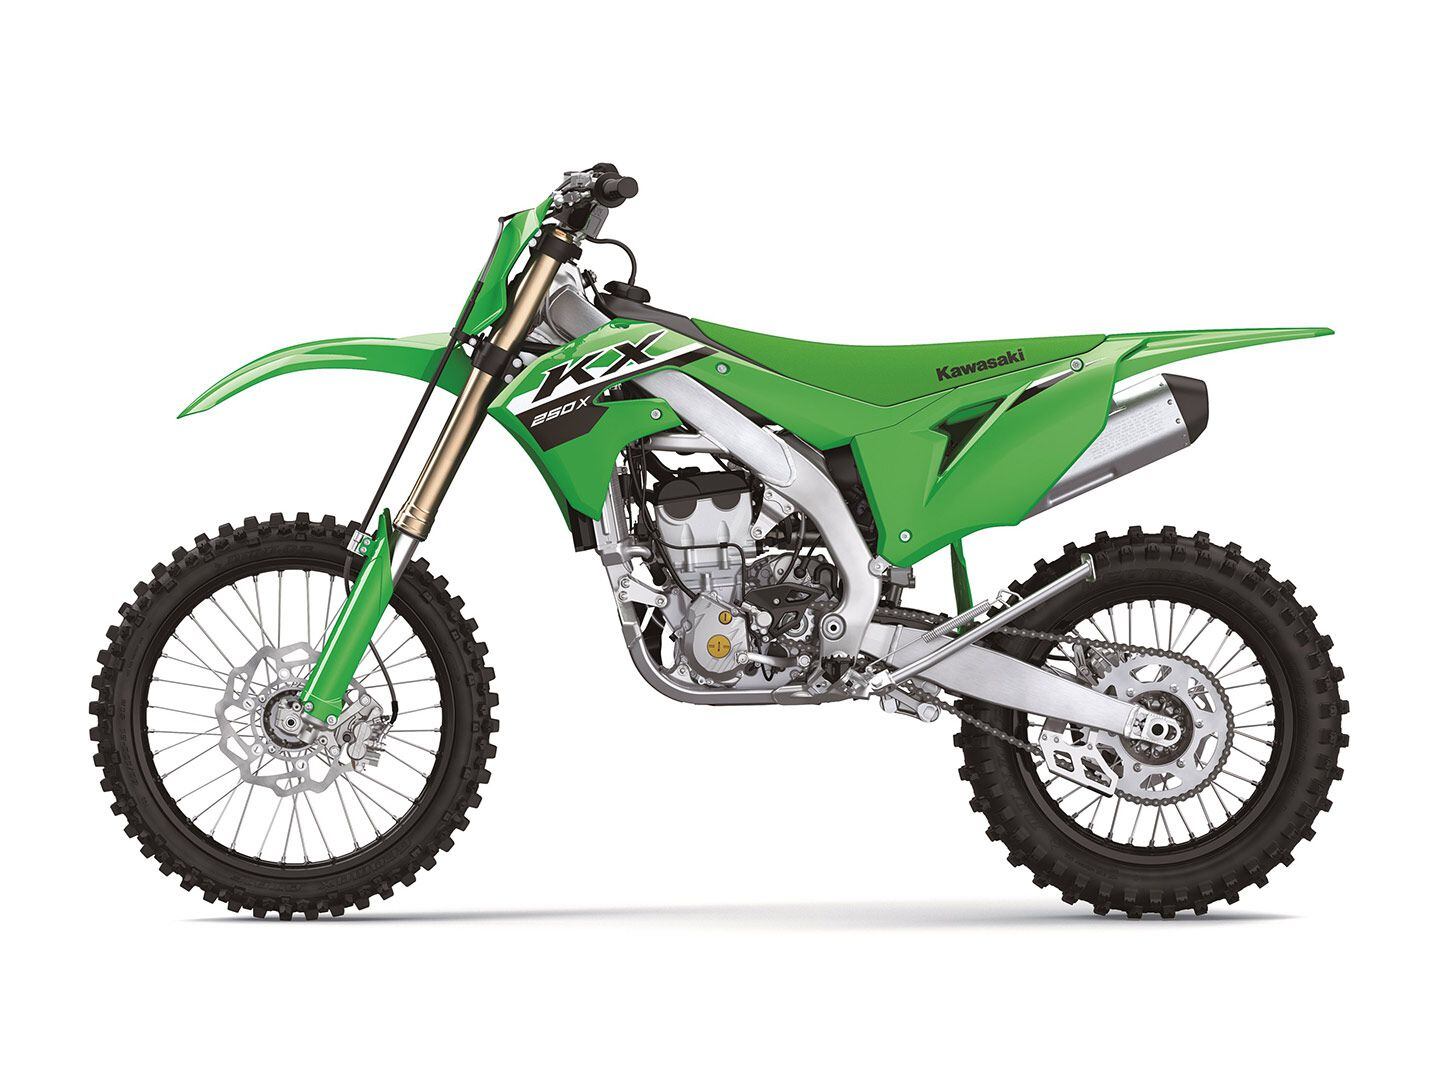 Radiator shroud graphics and fork guard color are the only differences between the 2023 and 2024 Kawasaki KX250X. This year, Team Green’s quarter-liter off-road competition model retails for $8,899.